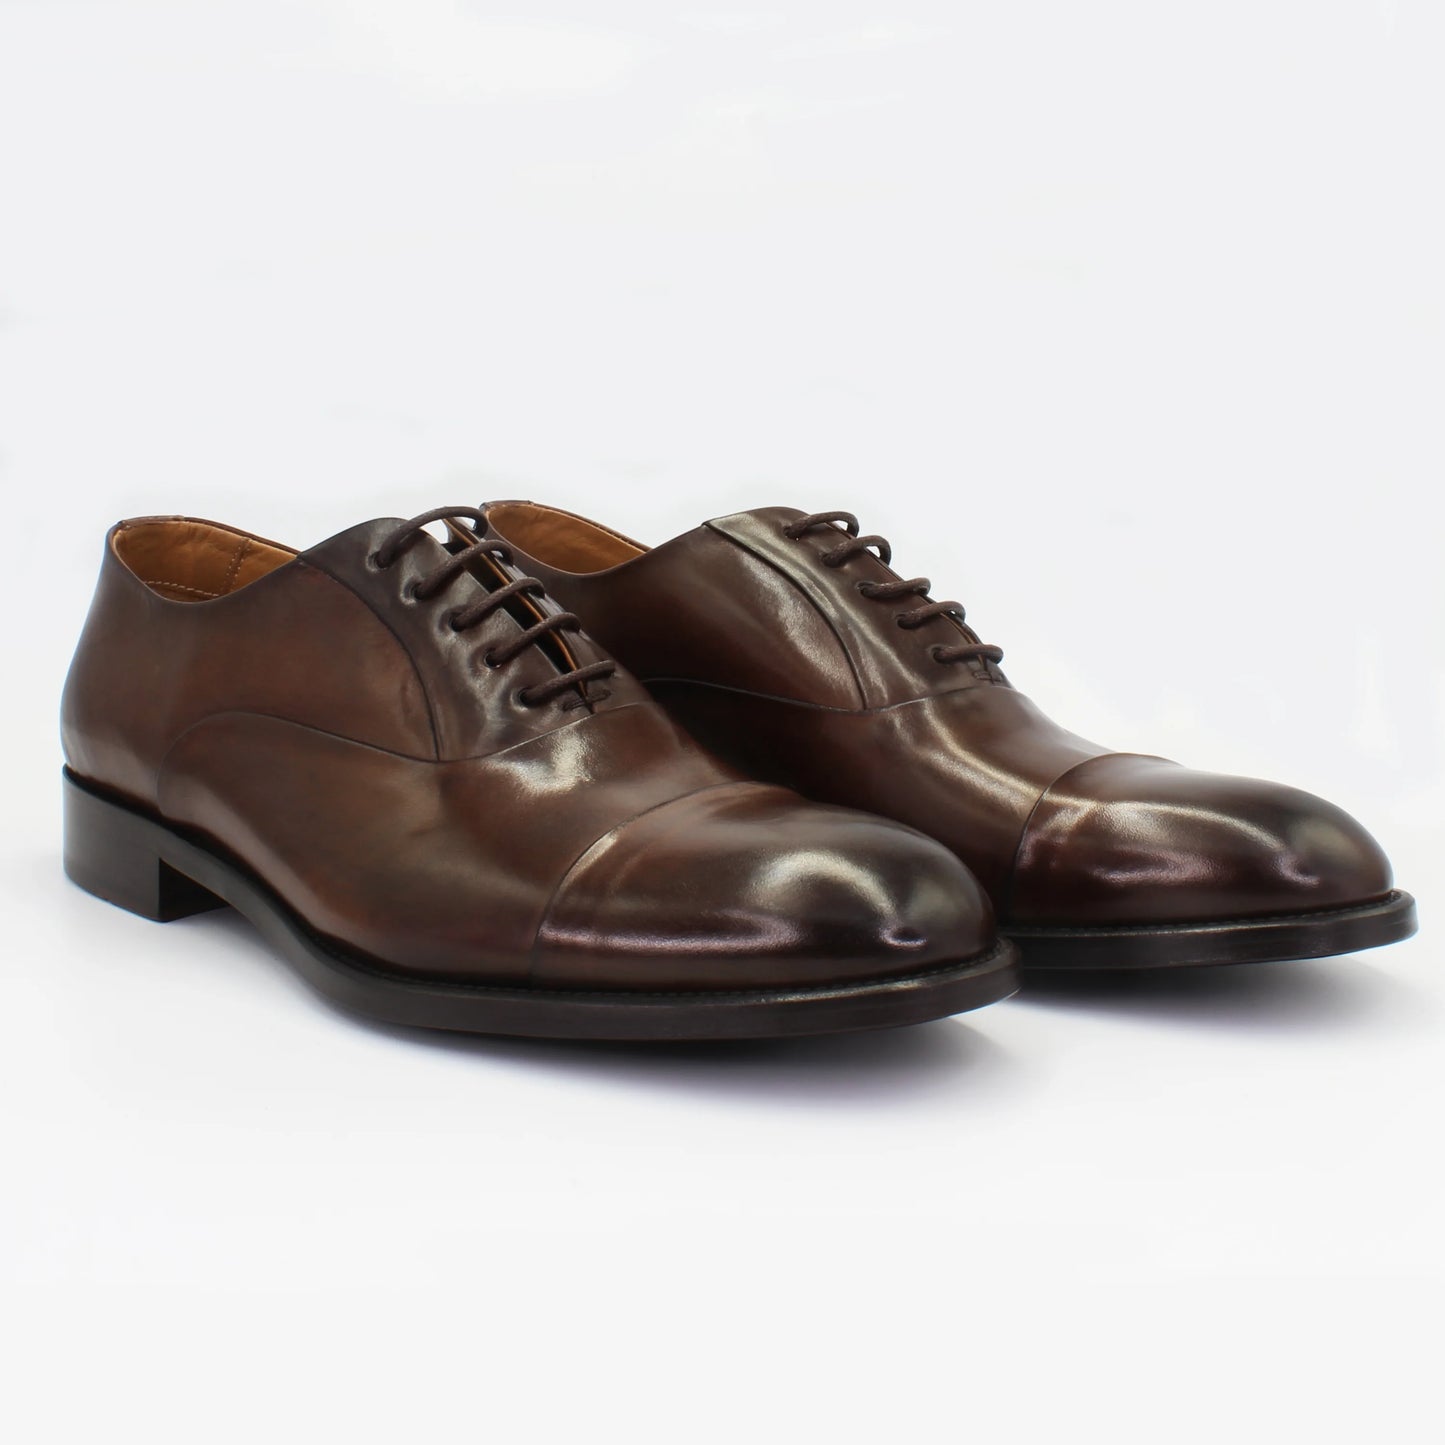 Shop Handmade Italian Leather Oxford in T.Moro (BRU11278)  or browse our range of hand-made Italian Shoes for men in leather or suede in-store at Aliverti Cape Town, or shop online. We deliver in South Africa & offer multiple payment plans as well as accept multiple safe & secure payment methods.